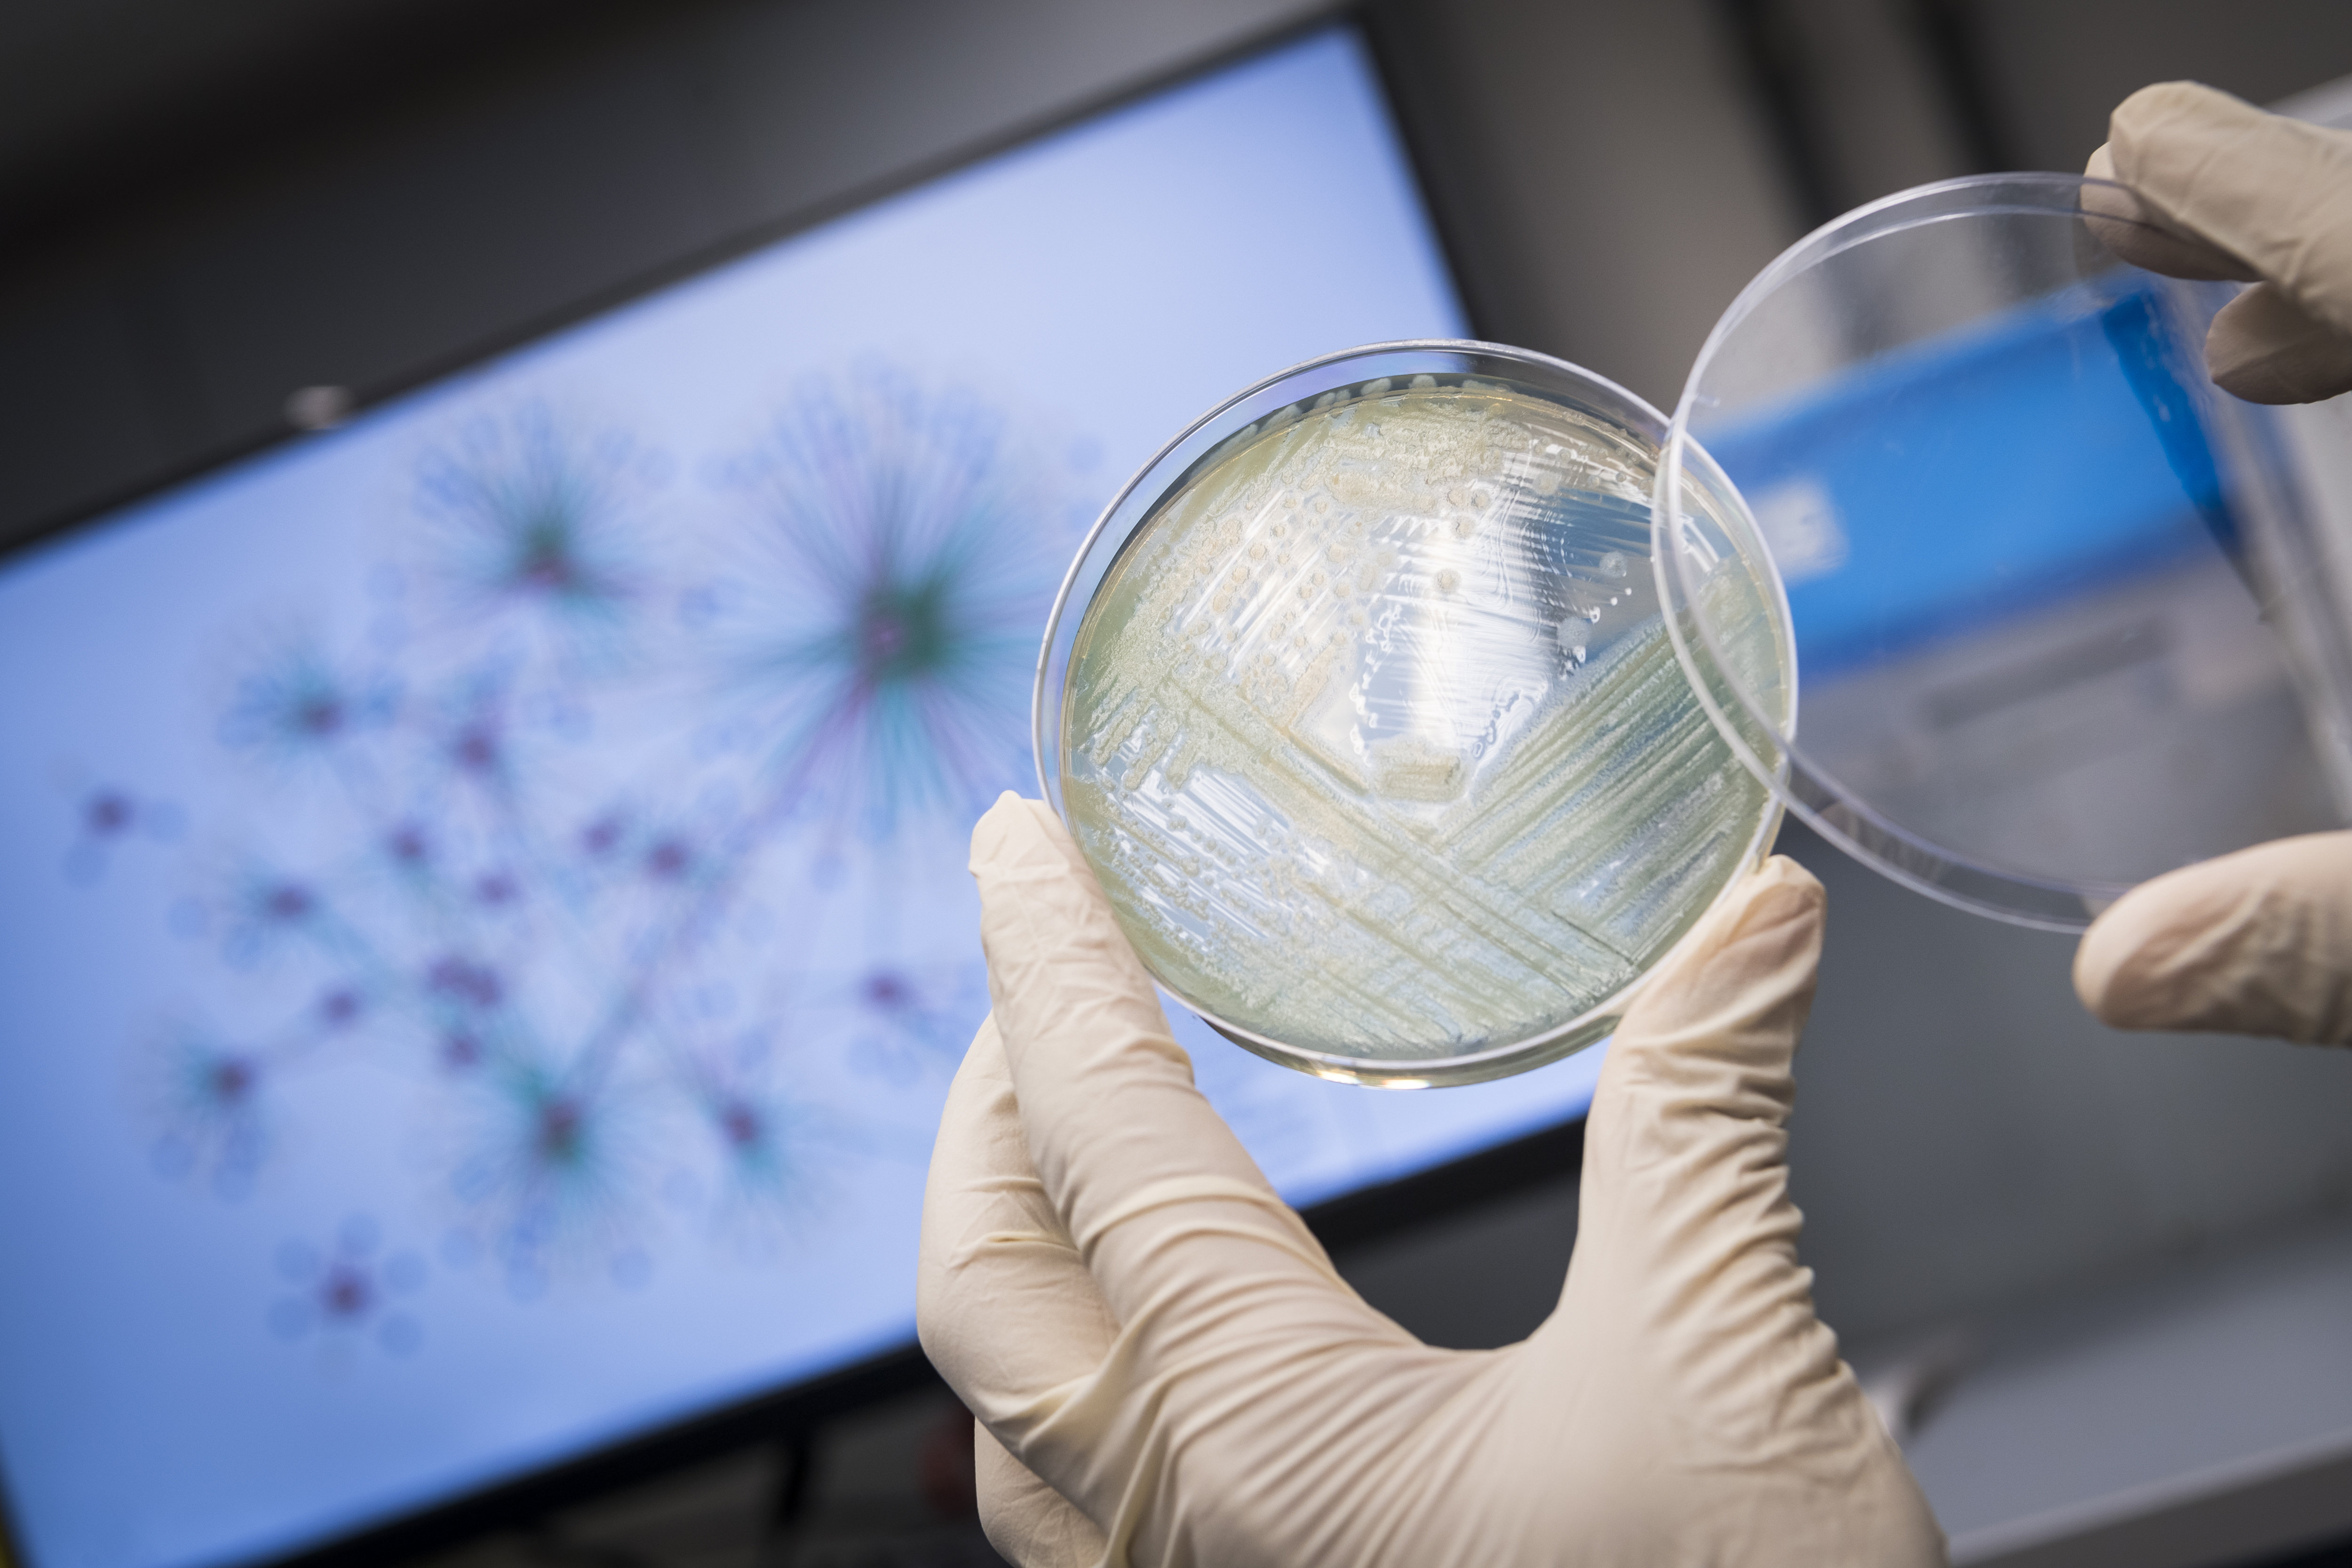 Pseudomonas aeruginosa, a superbug classified as one of the three “critical priority pathogens” that new drugs are urgently needed.